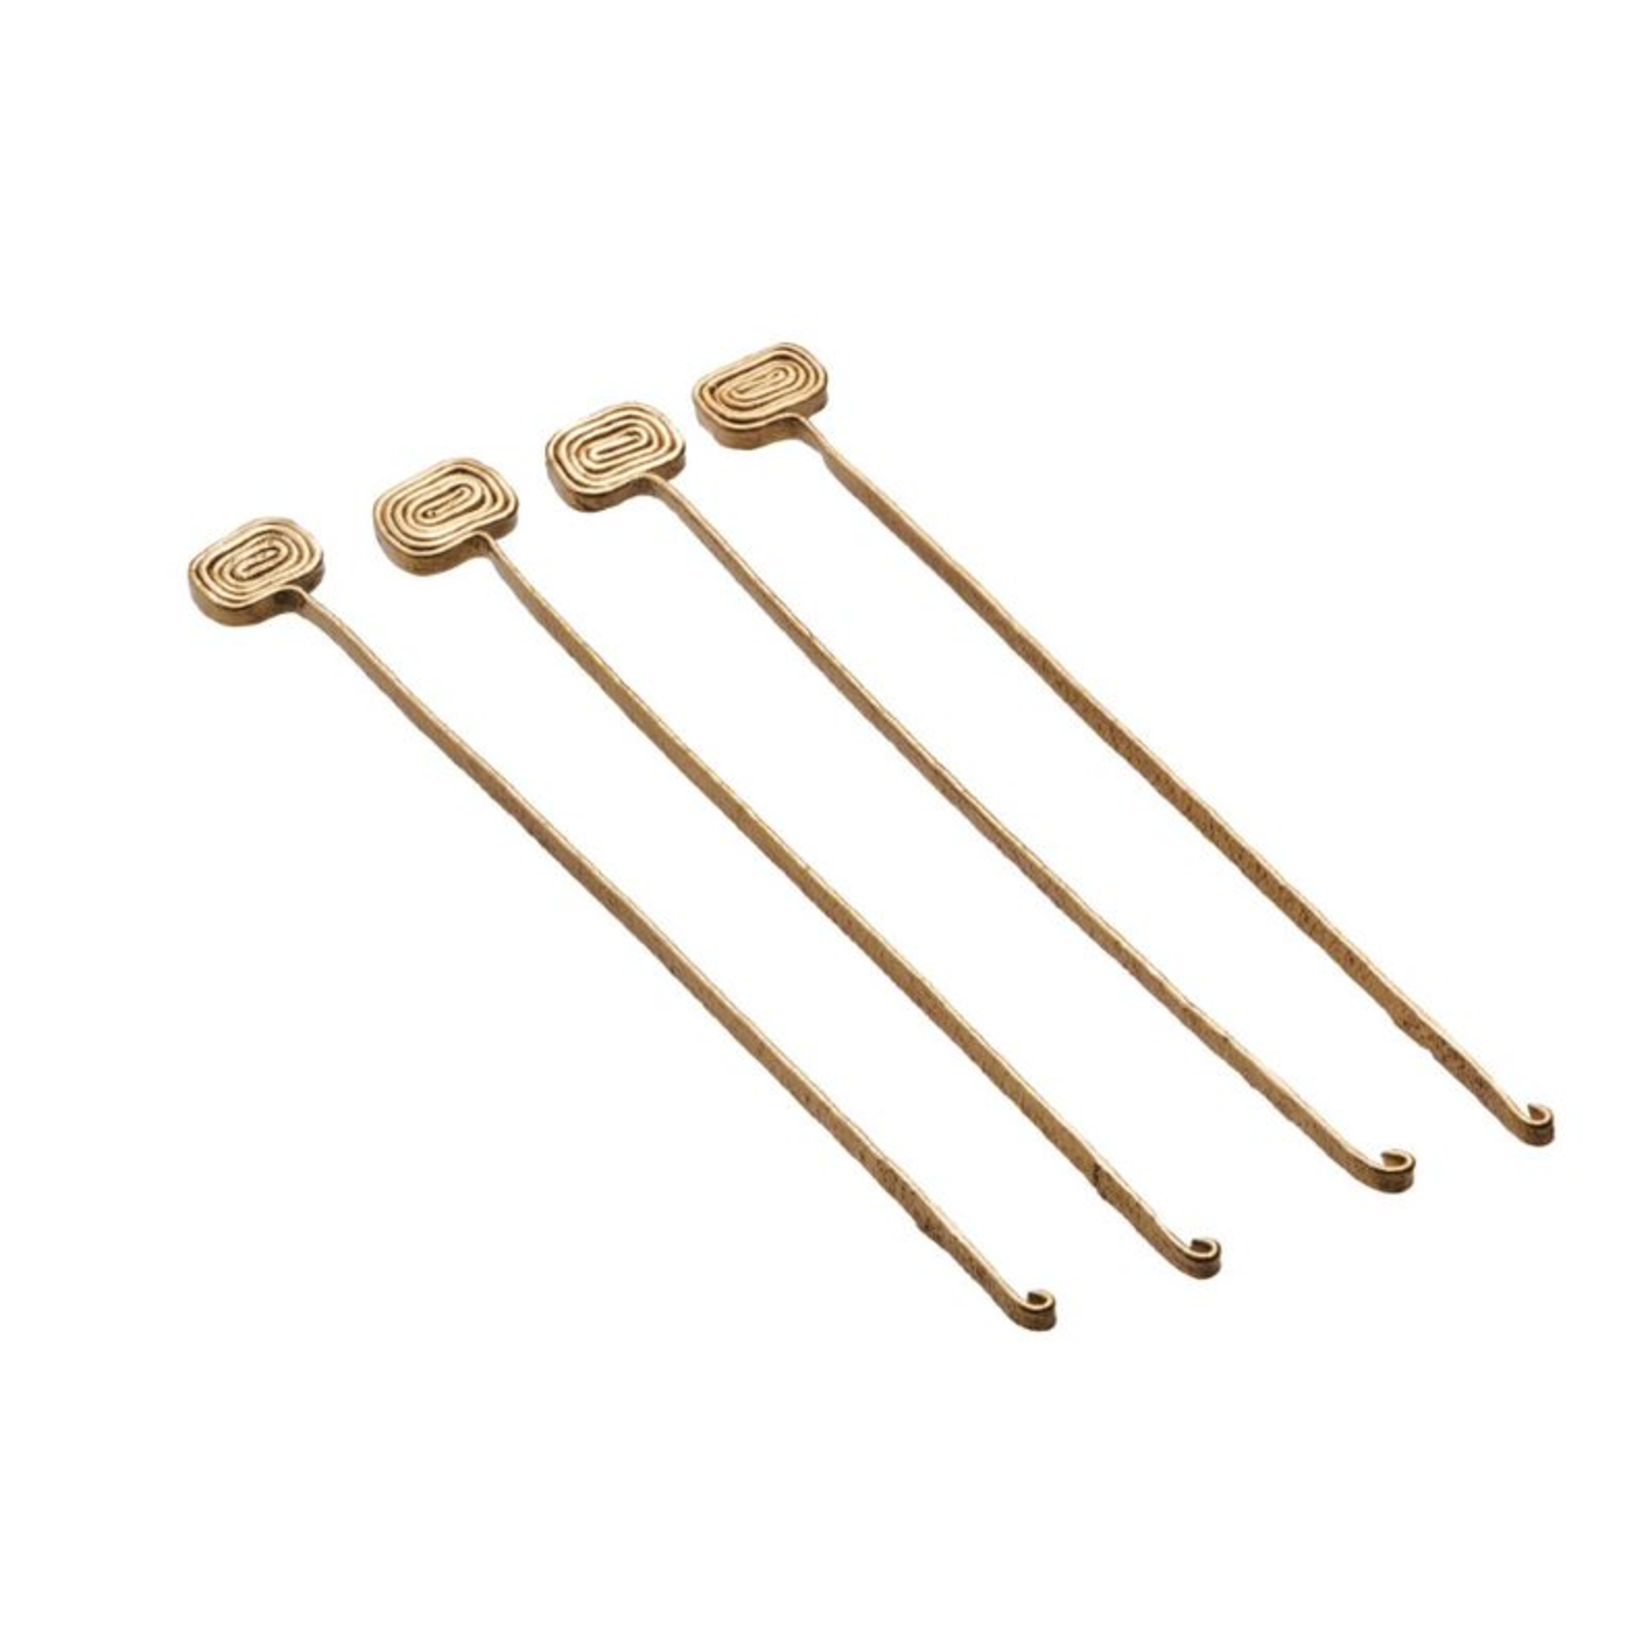 Texxture Carnaby Stirrers Set of 4